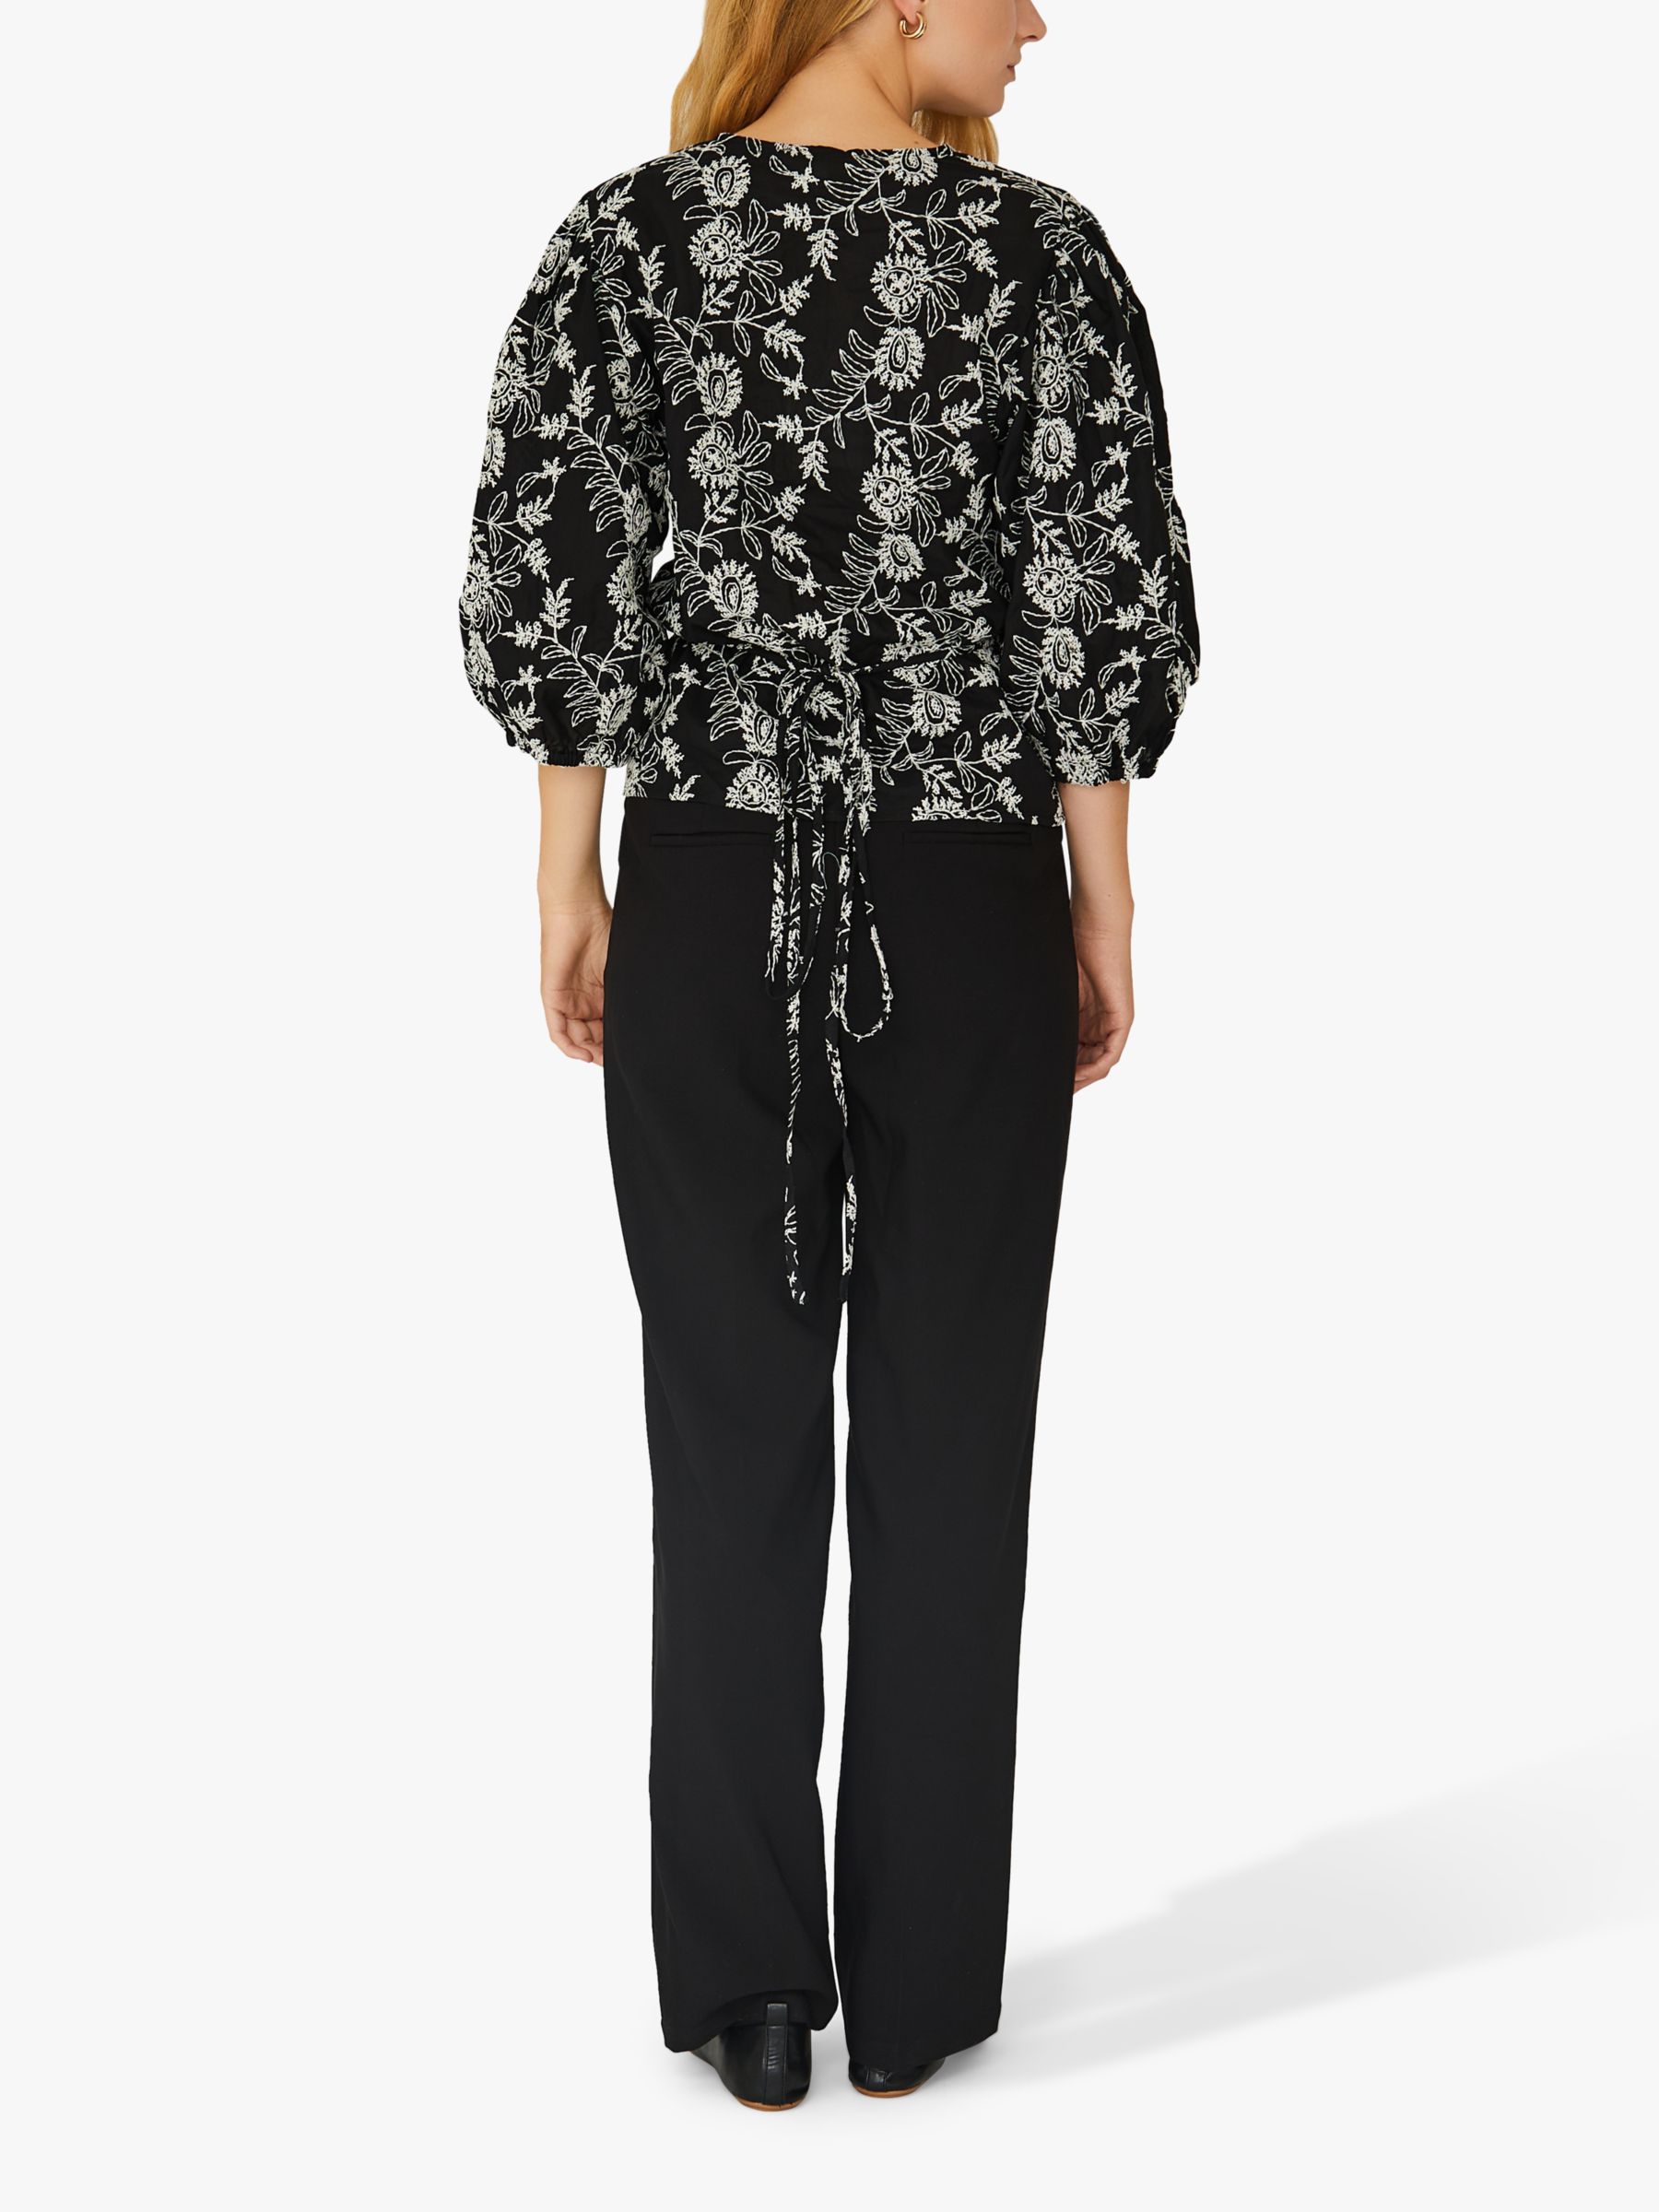 Buy A-VIEW Embroidered Cotton Blouse, Black/Off White Online at johnlewis.com